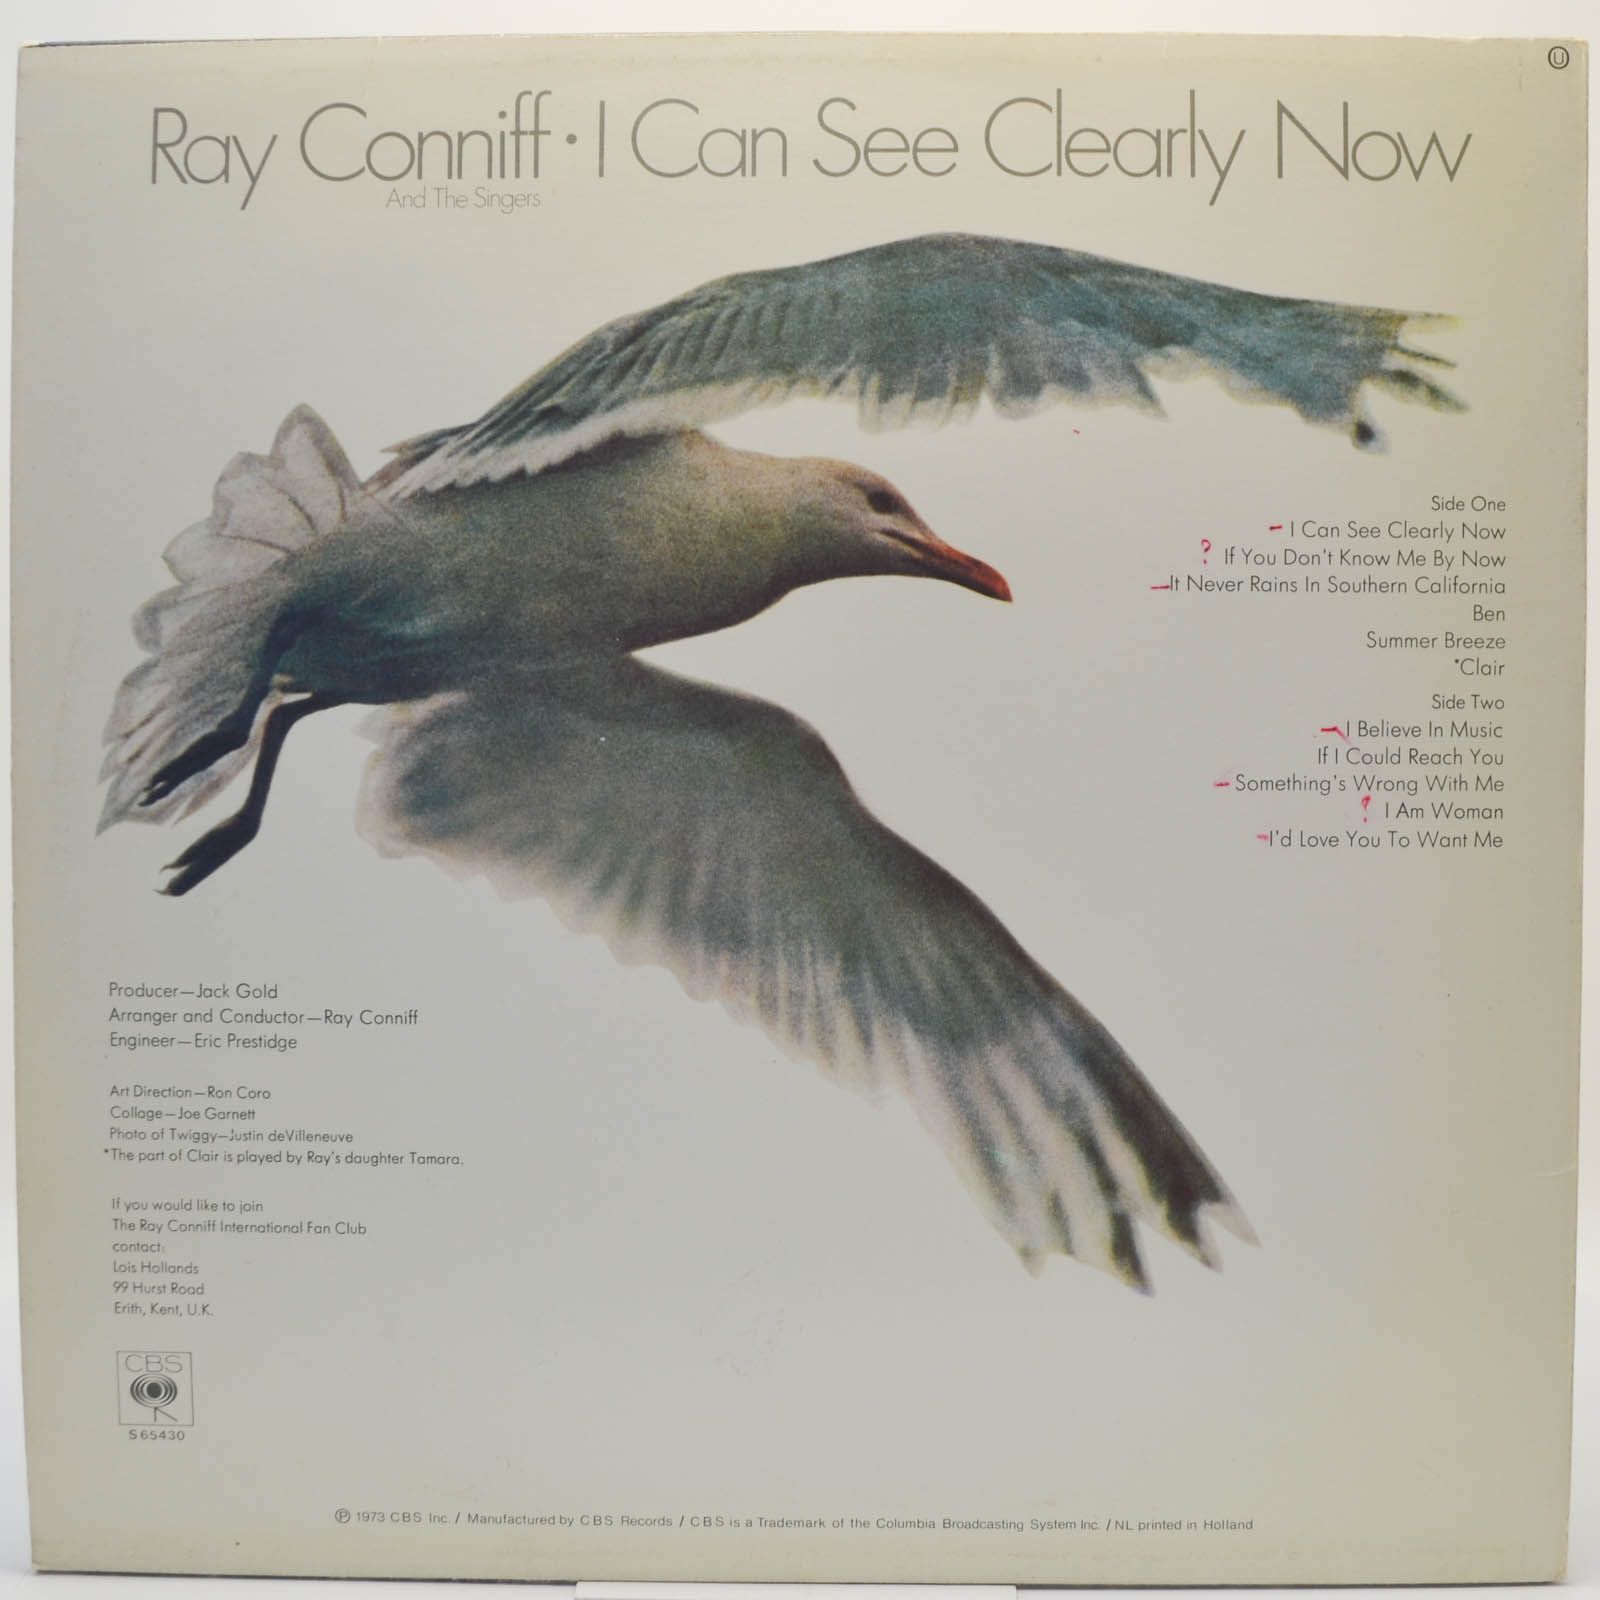 Ray Conniff — I Can See Clearly Now, 1973